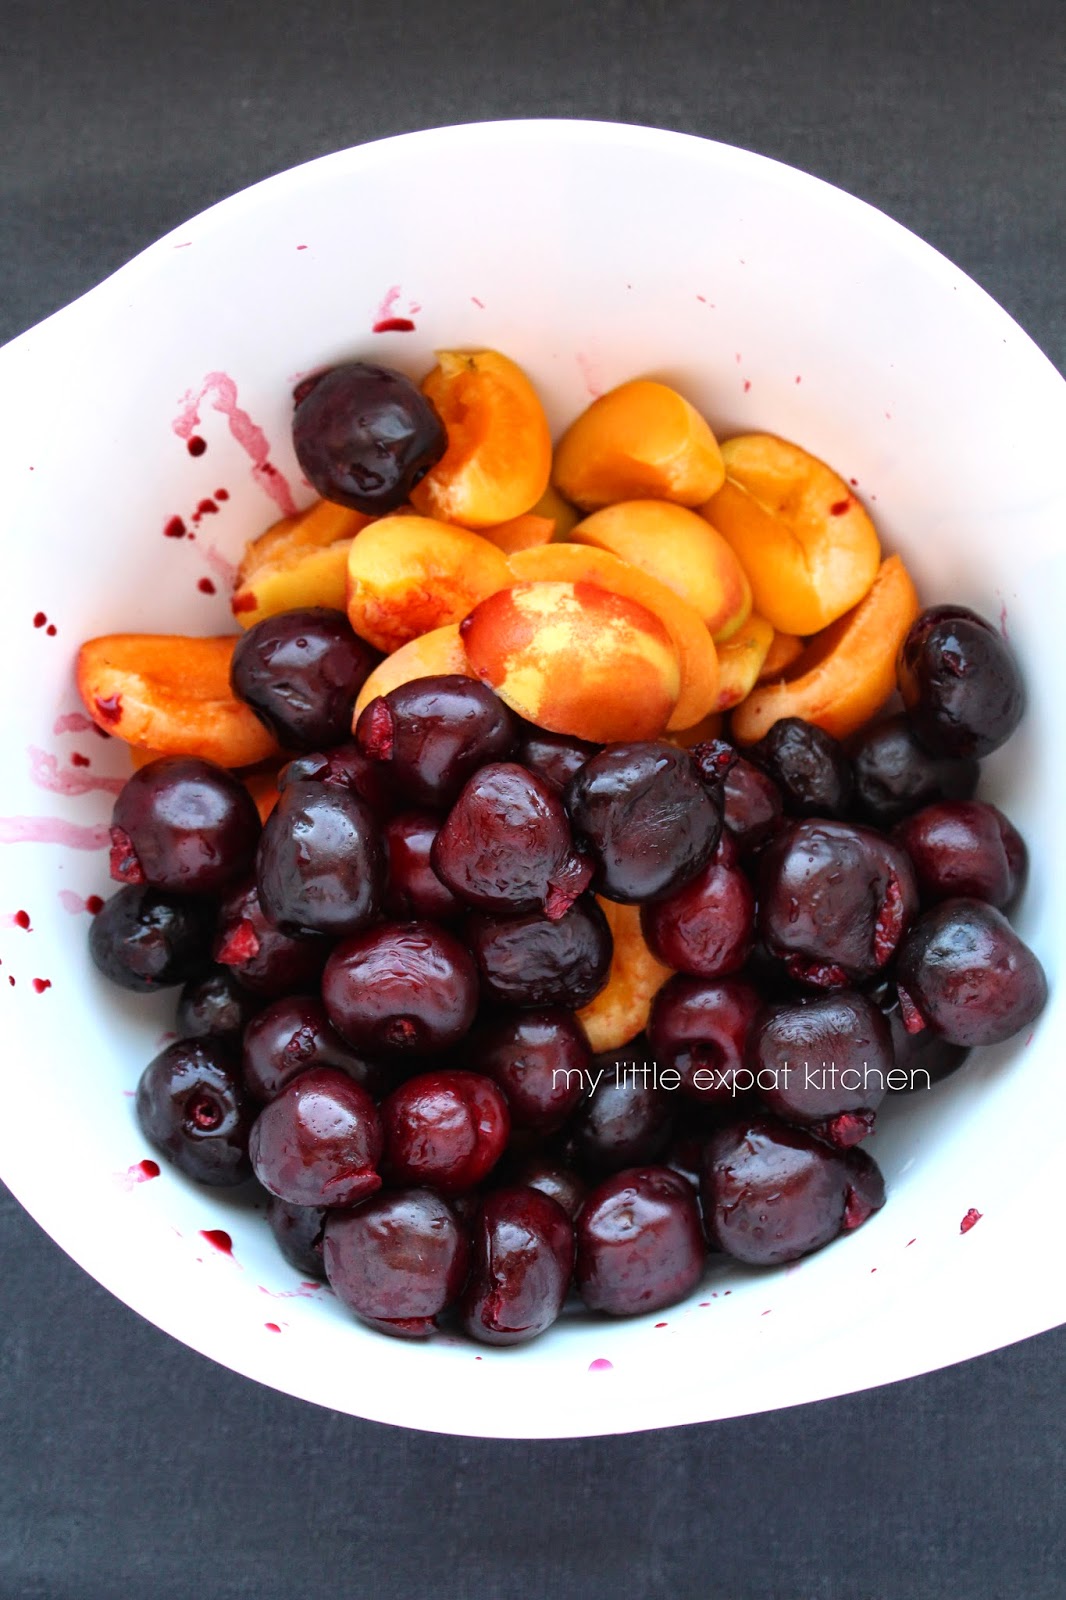 My Little Expat Kitchen: Cherries (and apricots): the dessert